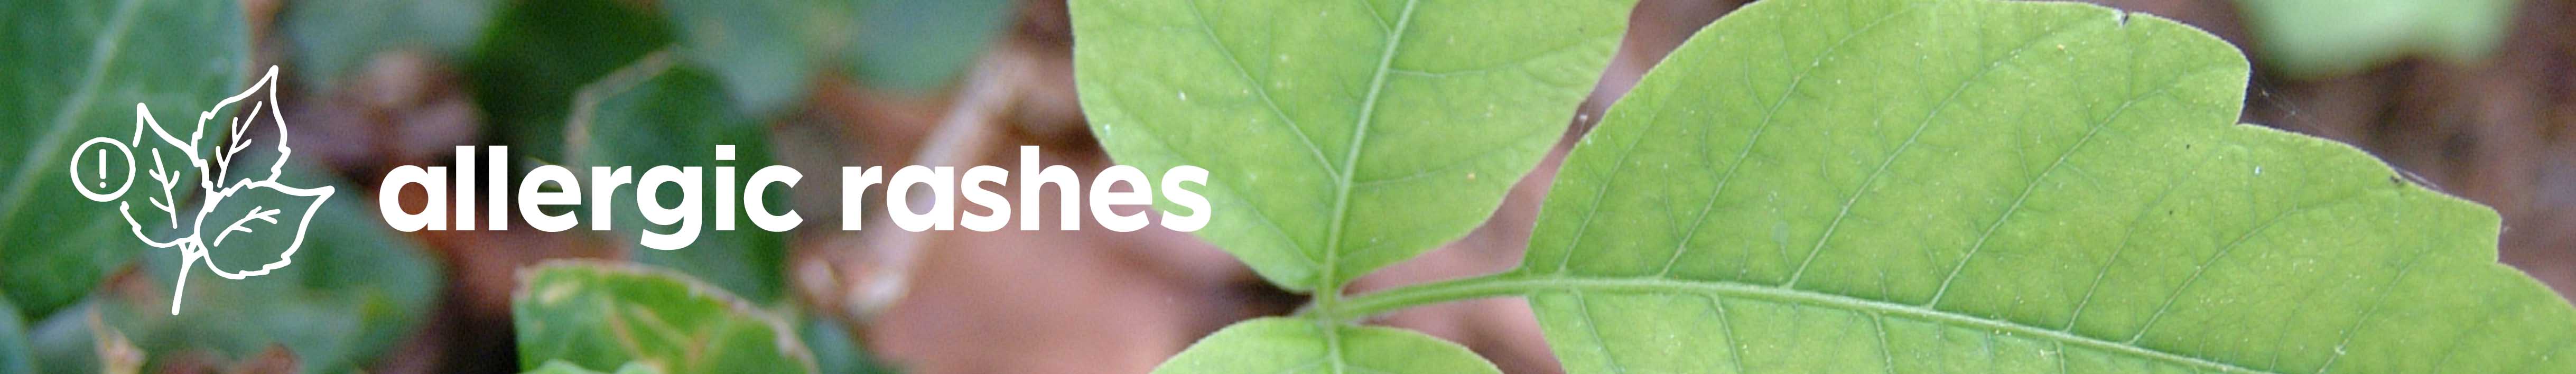 close-up of leaves with the words allergic rashes overlaid on the image